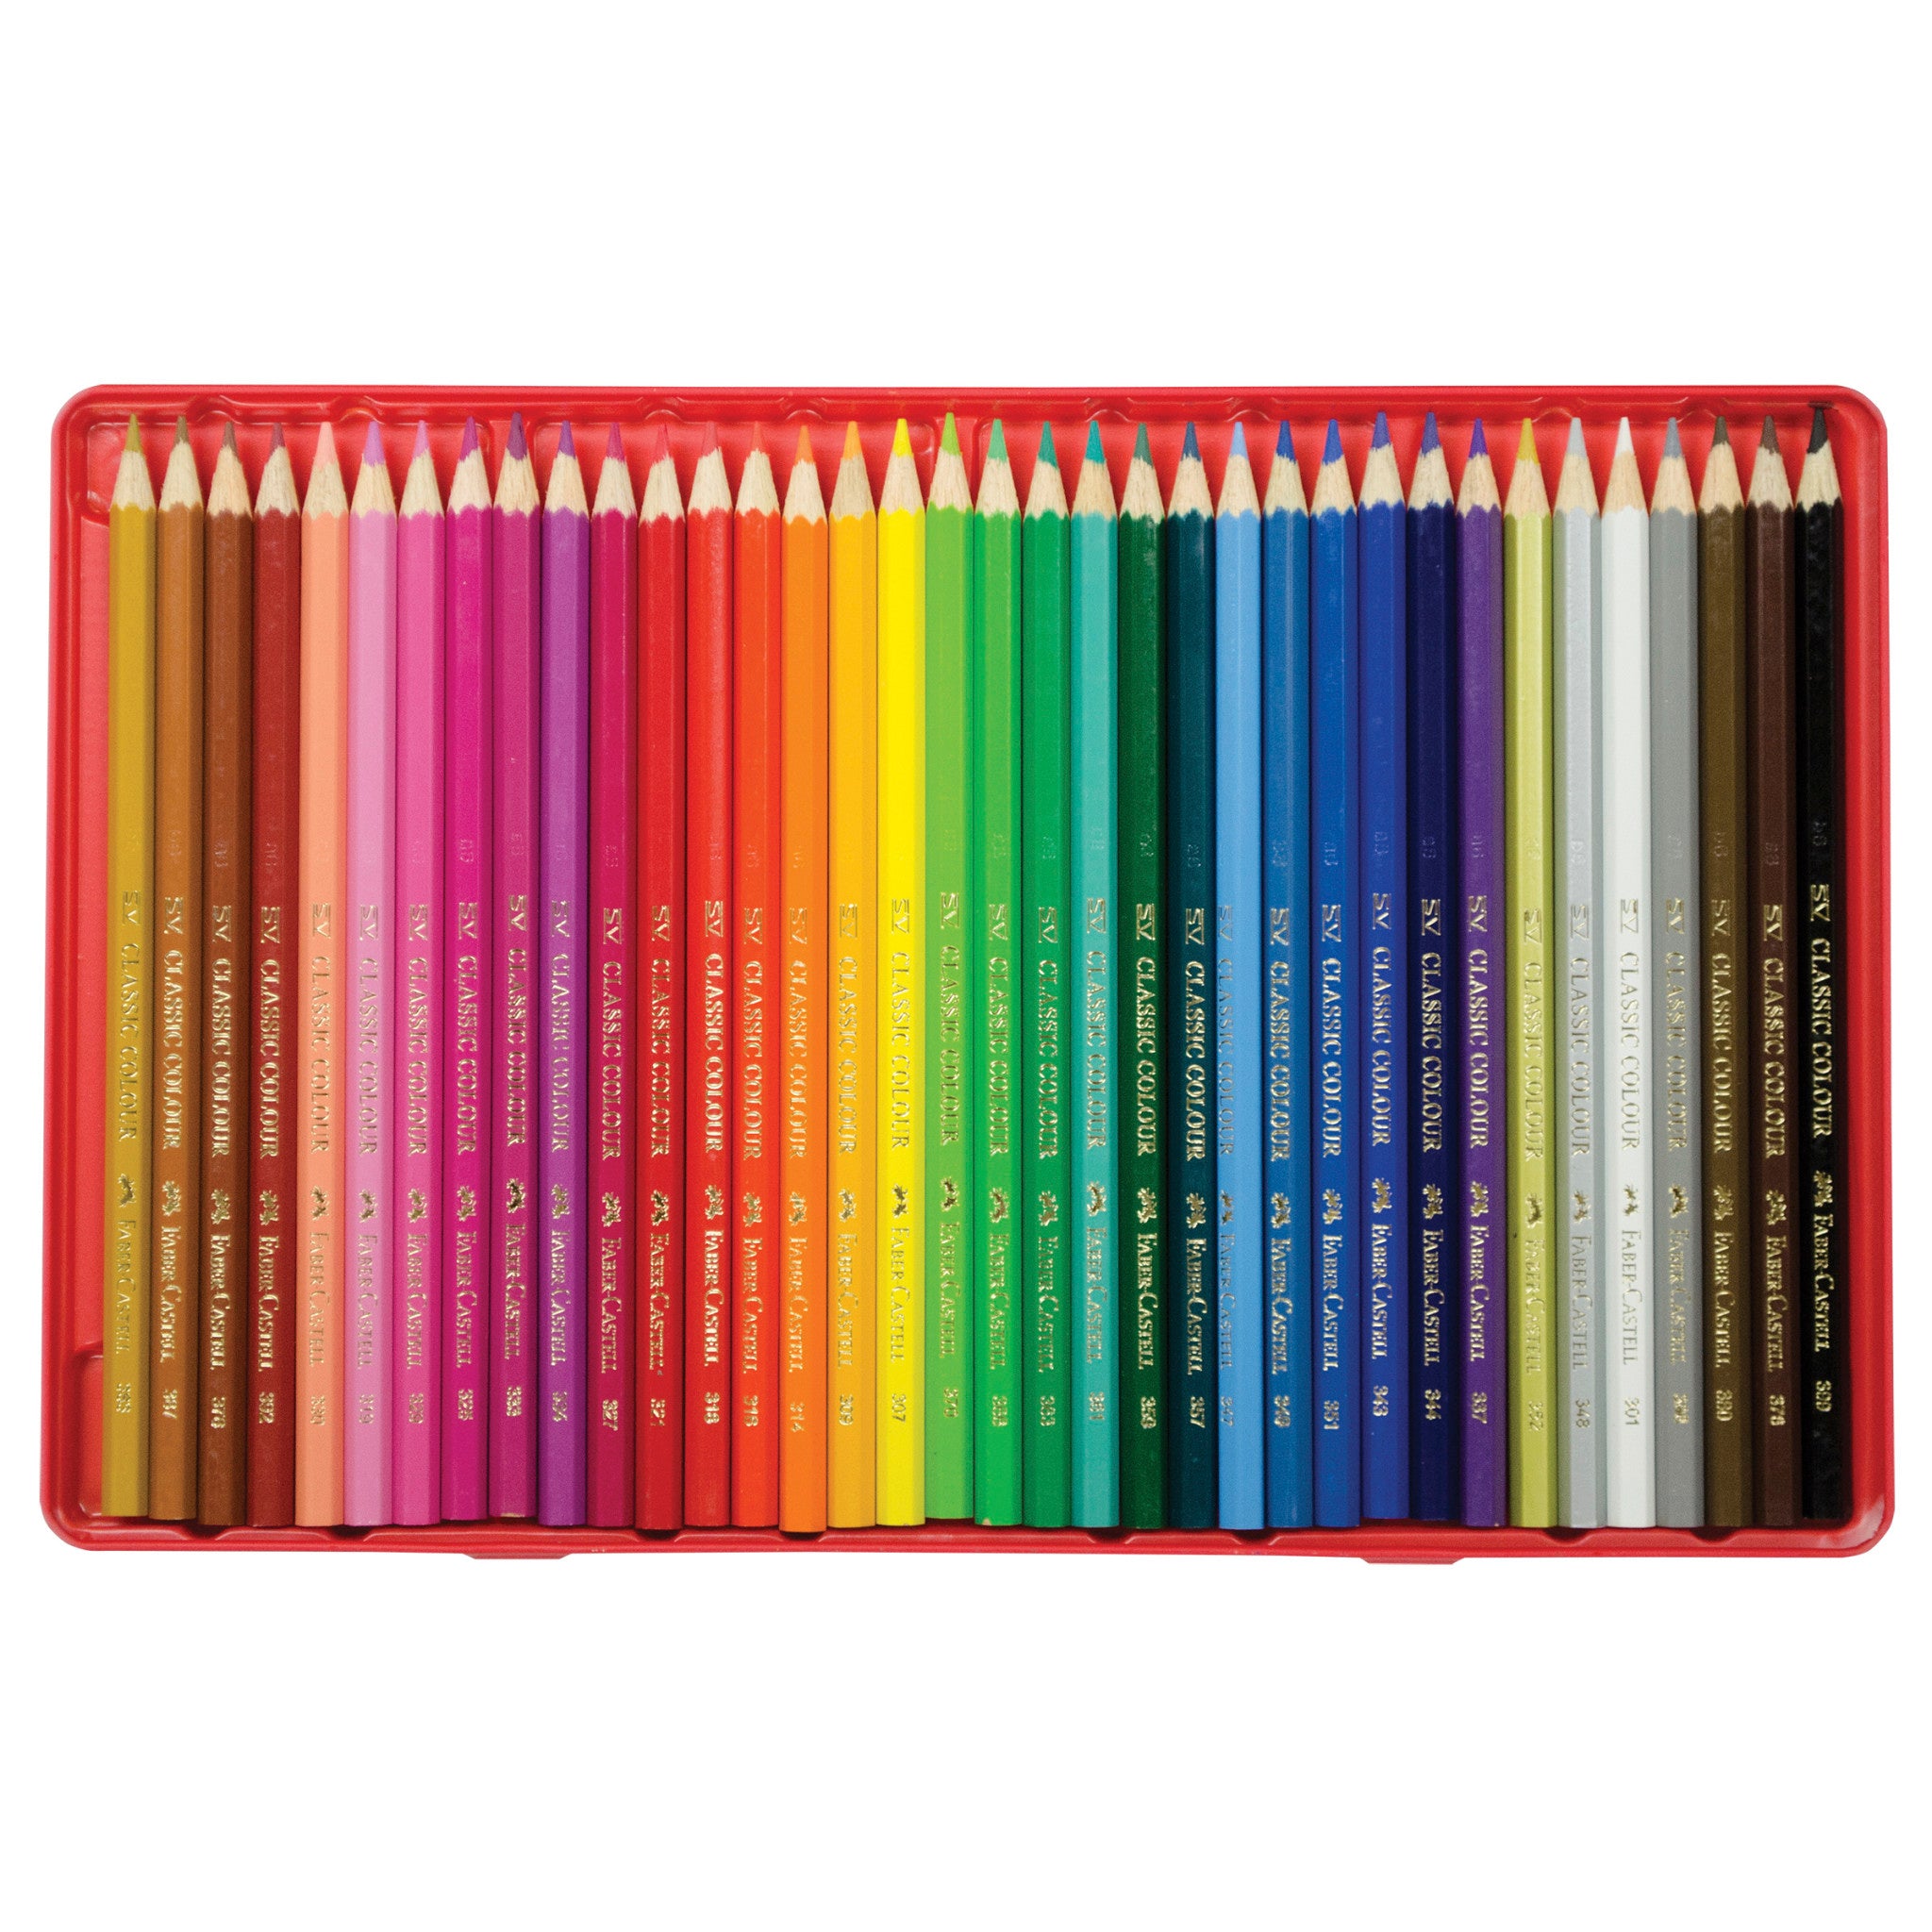 Faber-Castell Polychromos Colored Pencils Set of 36 - Art and